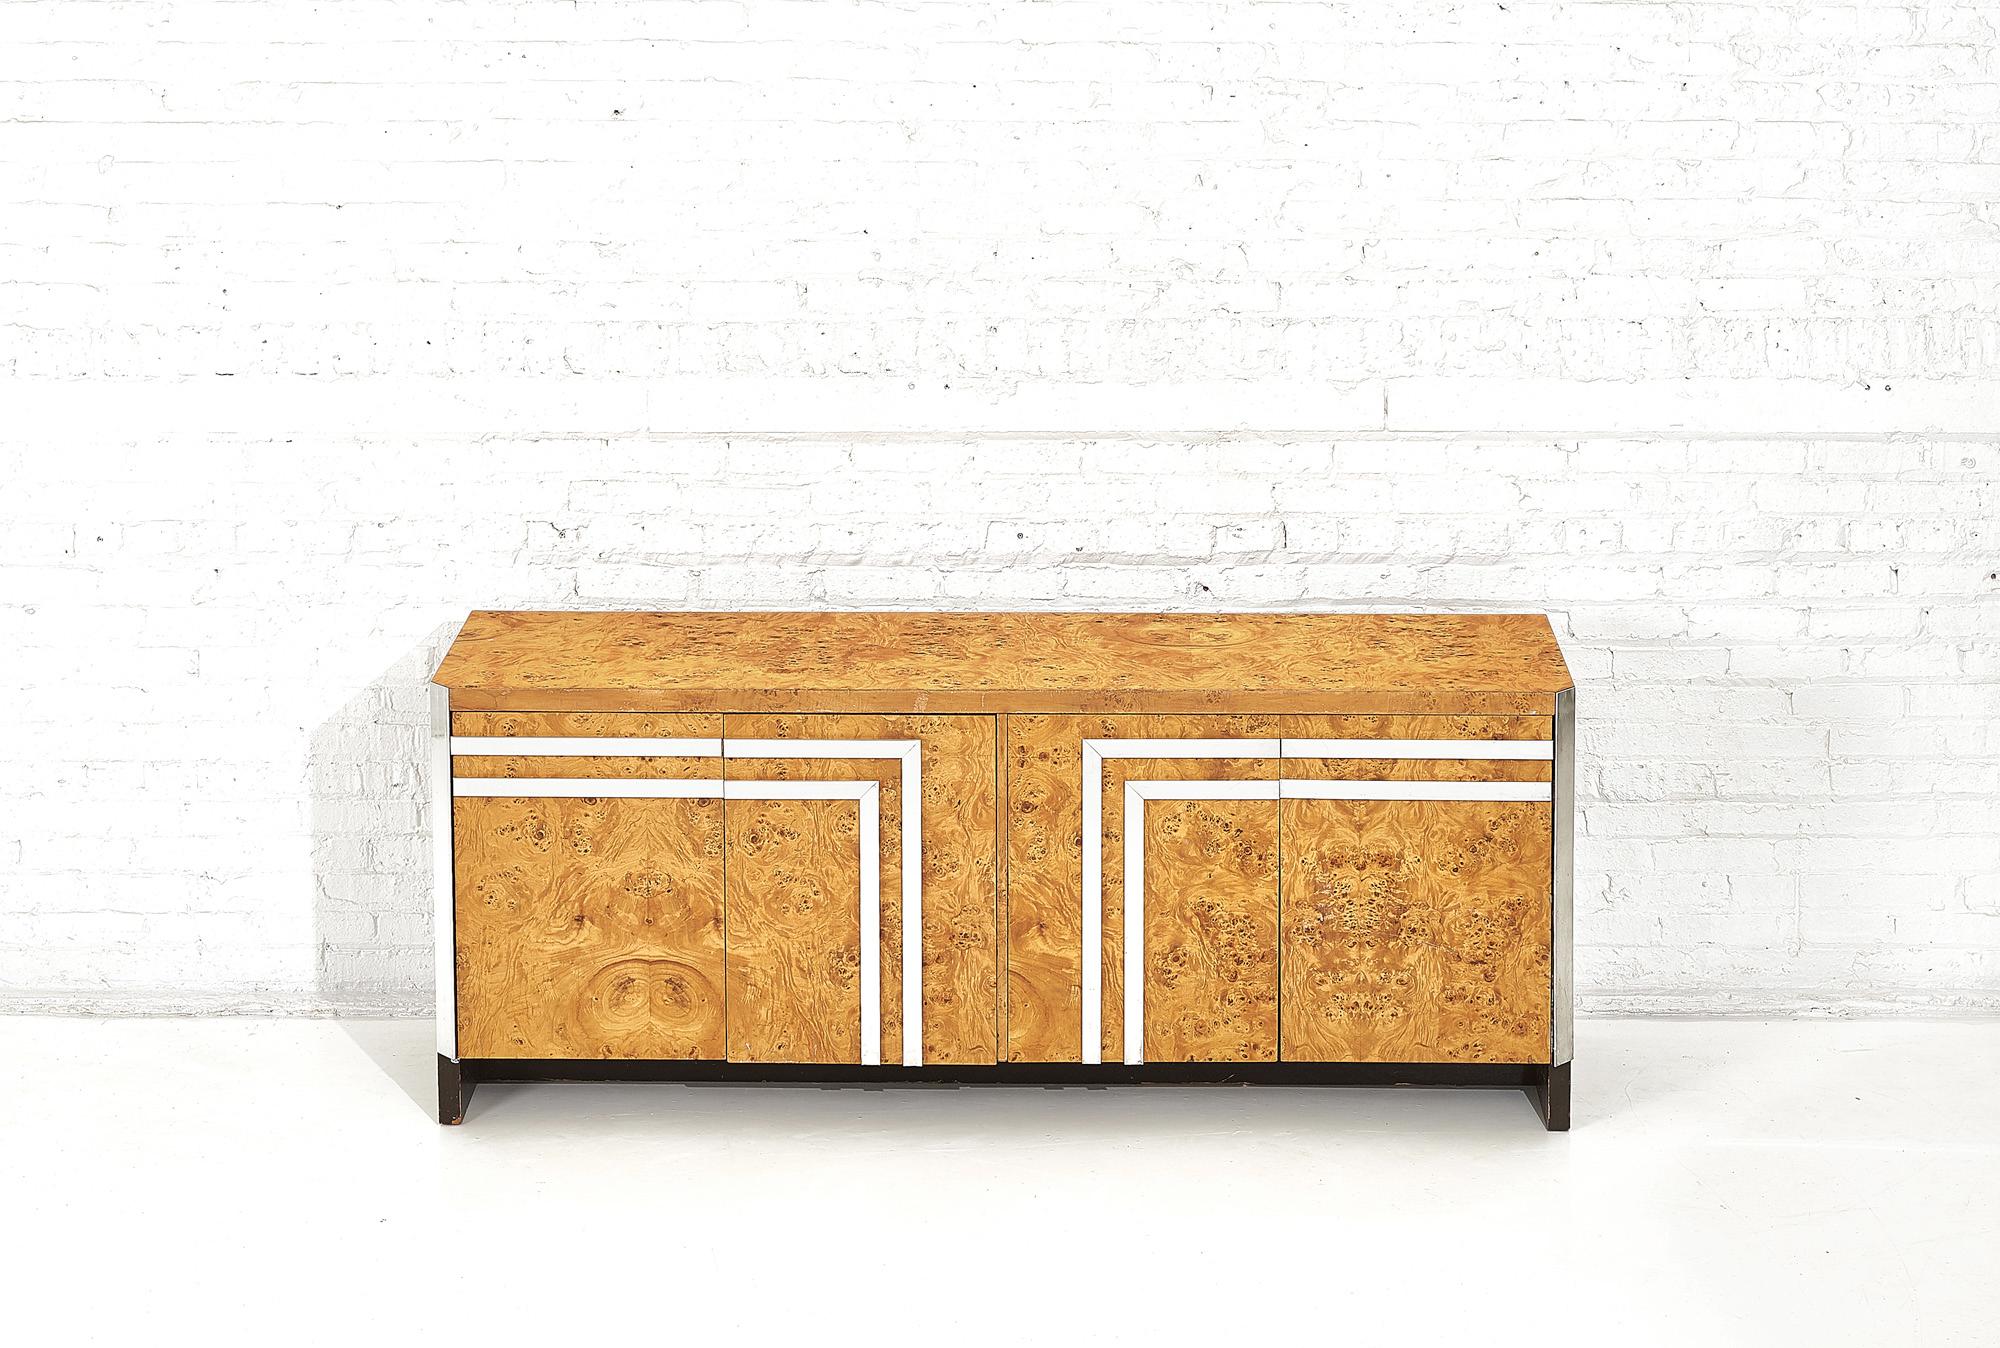 Burlwood and chrome sideboard dresser by Pace Collection. There are 6 drawers behind the 4 burl wood drawers. Designed by Leon Rosen. Italy 1970’s.